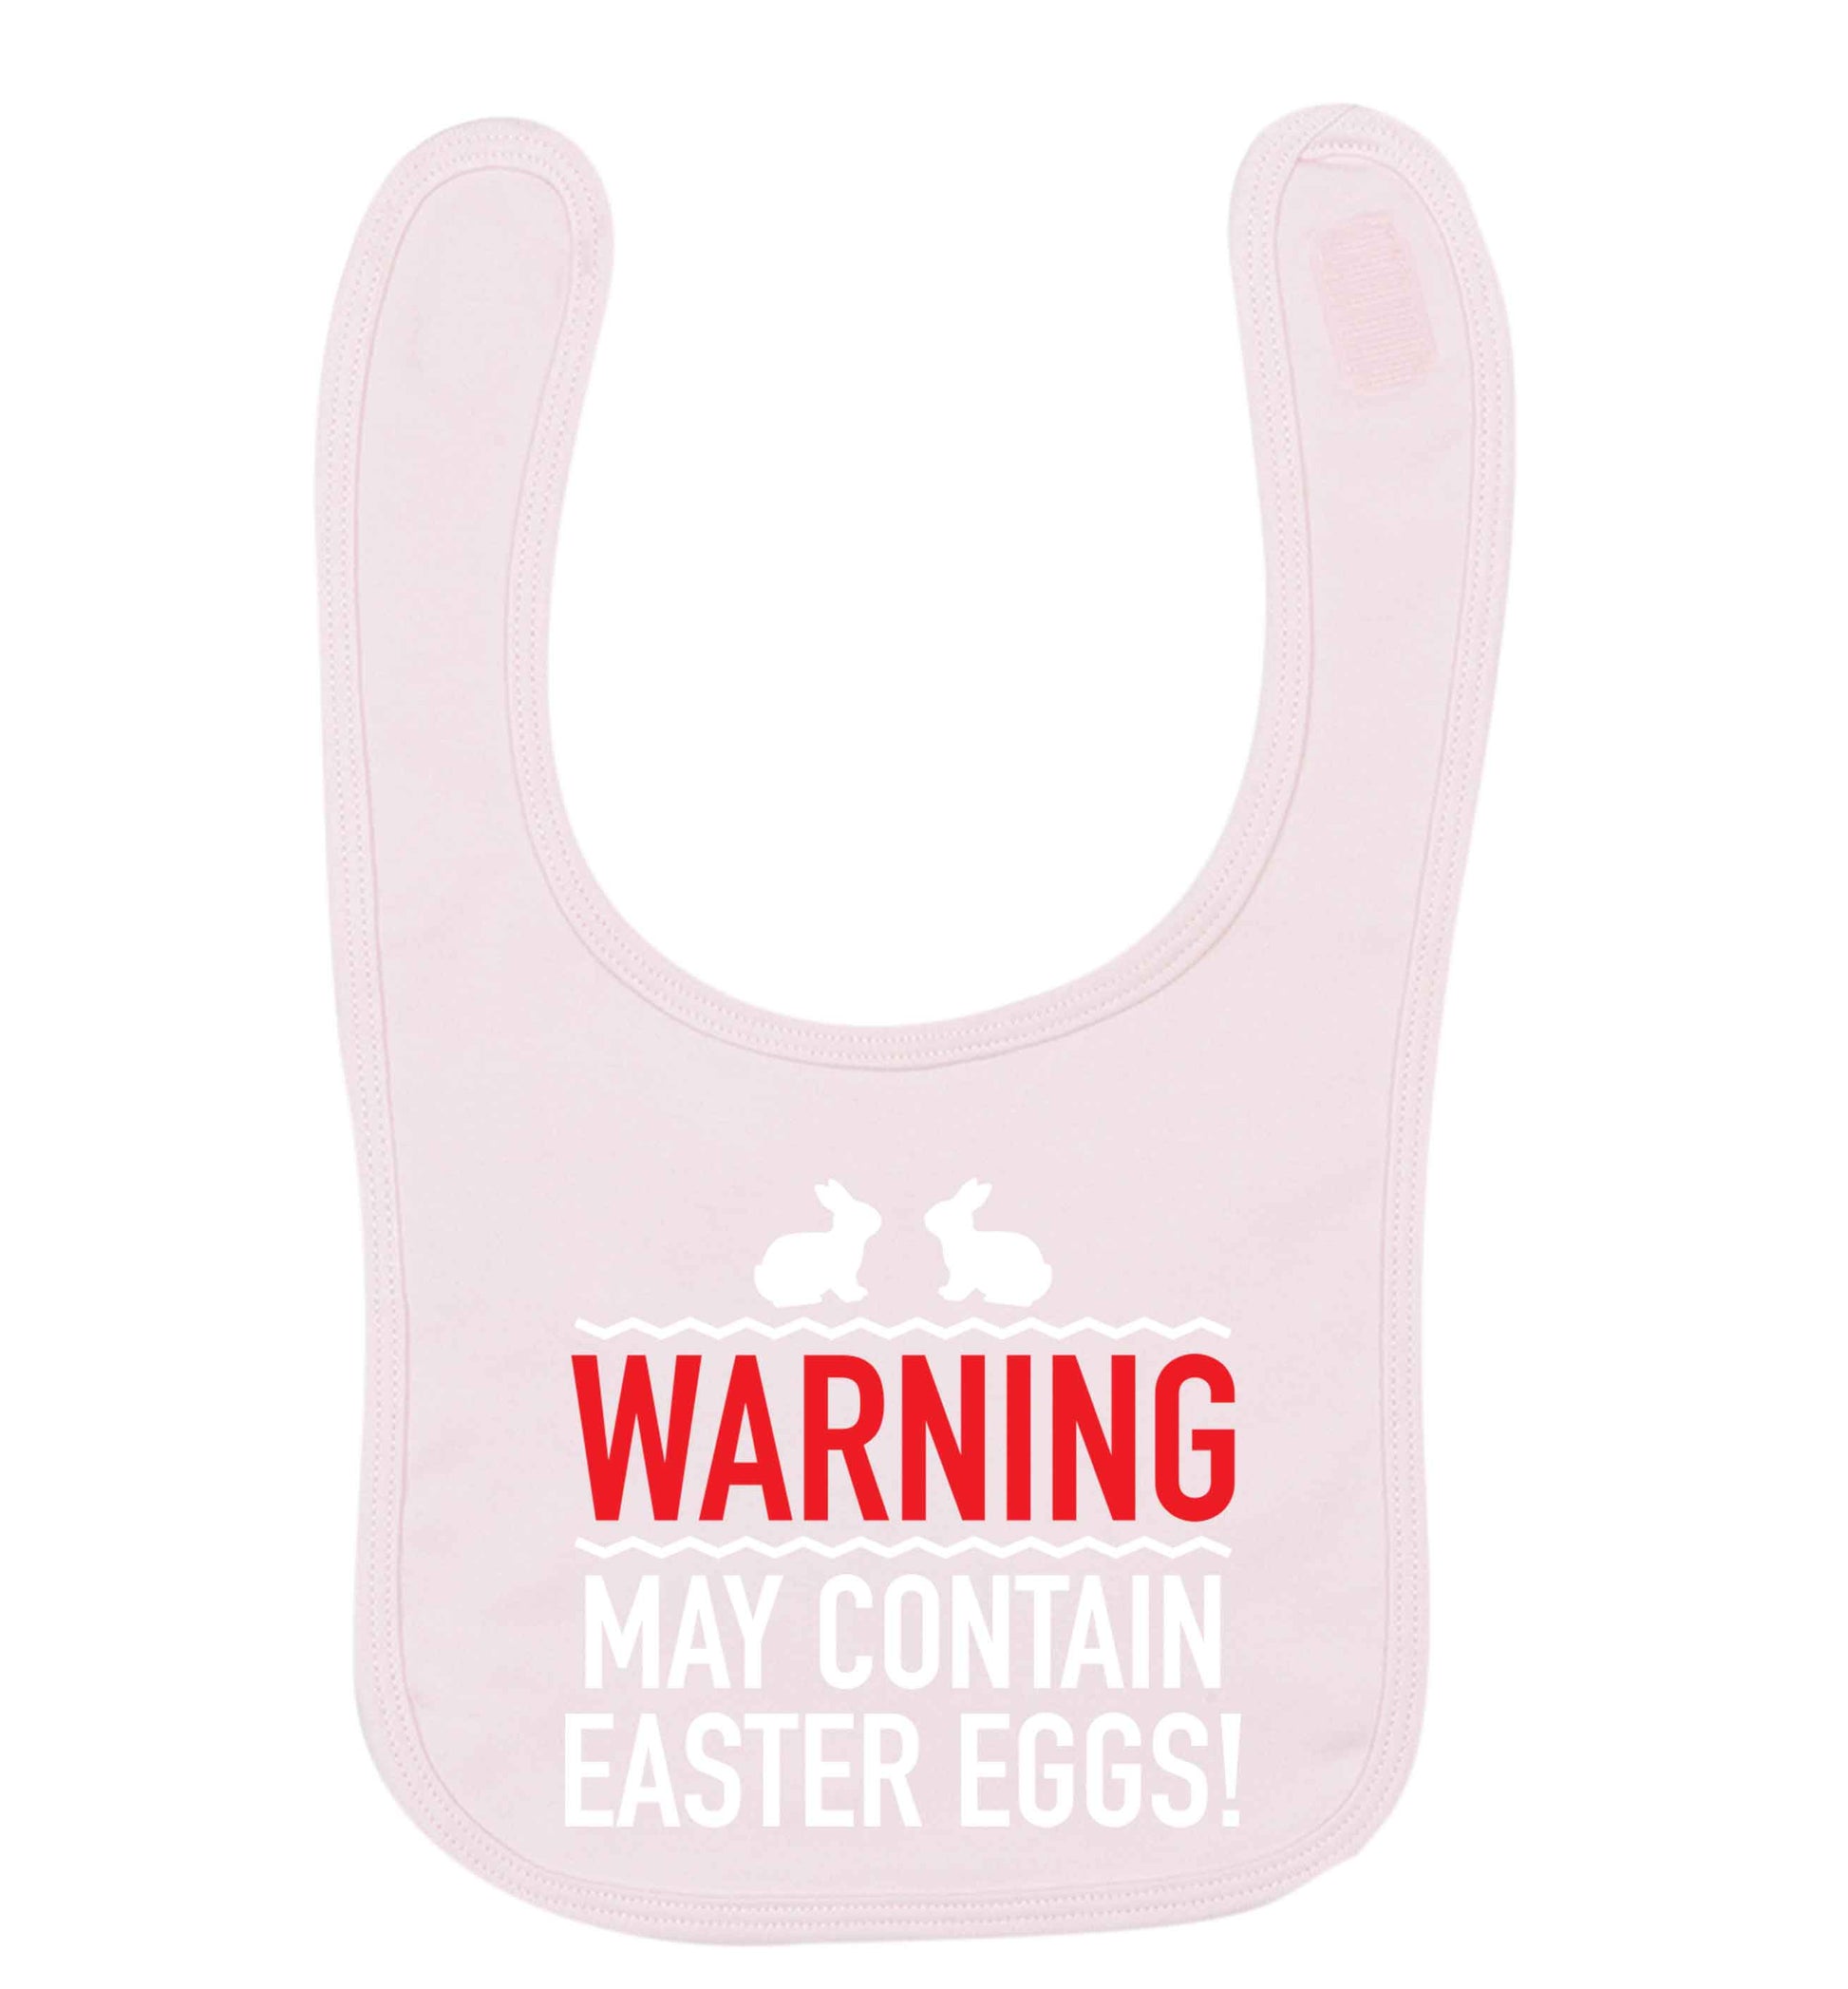 Warning may contain Easter eggs pale pink baby bib